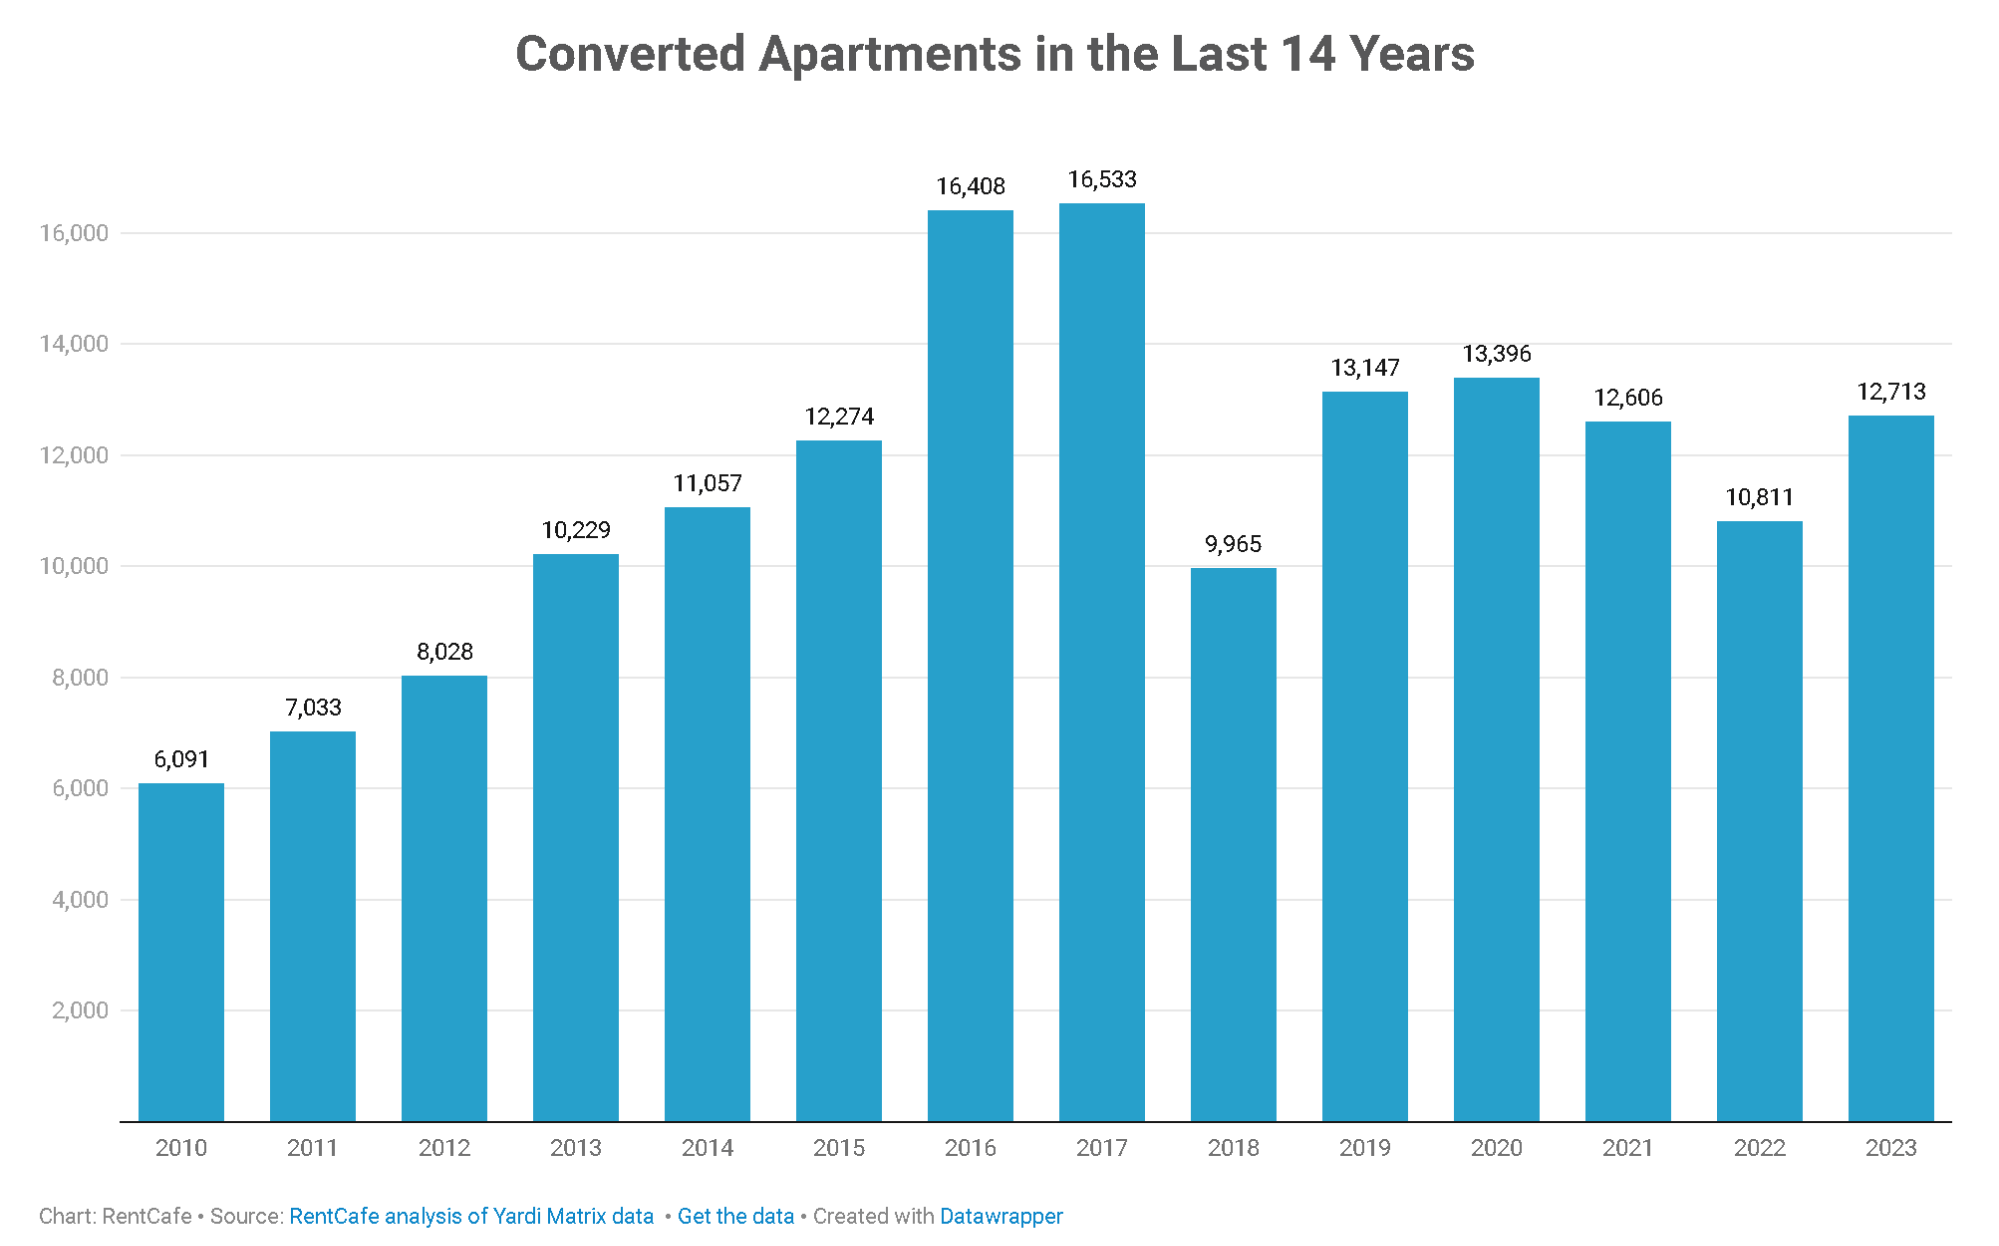 Conversions to apartments on the rise